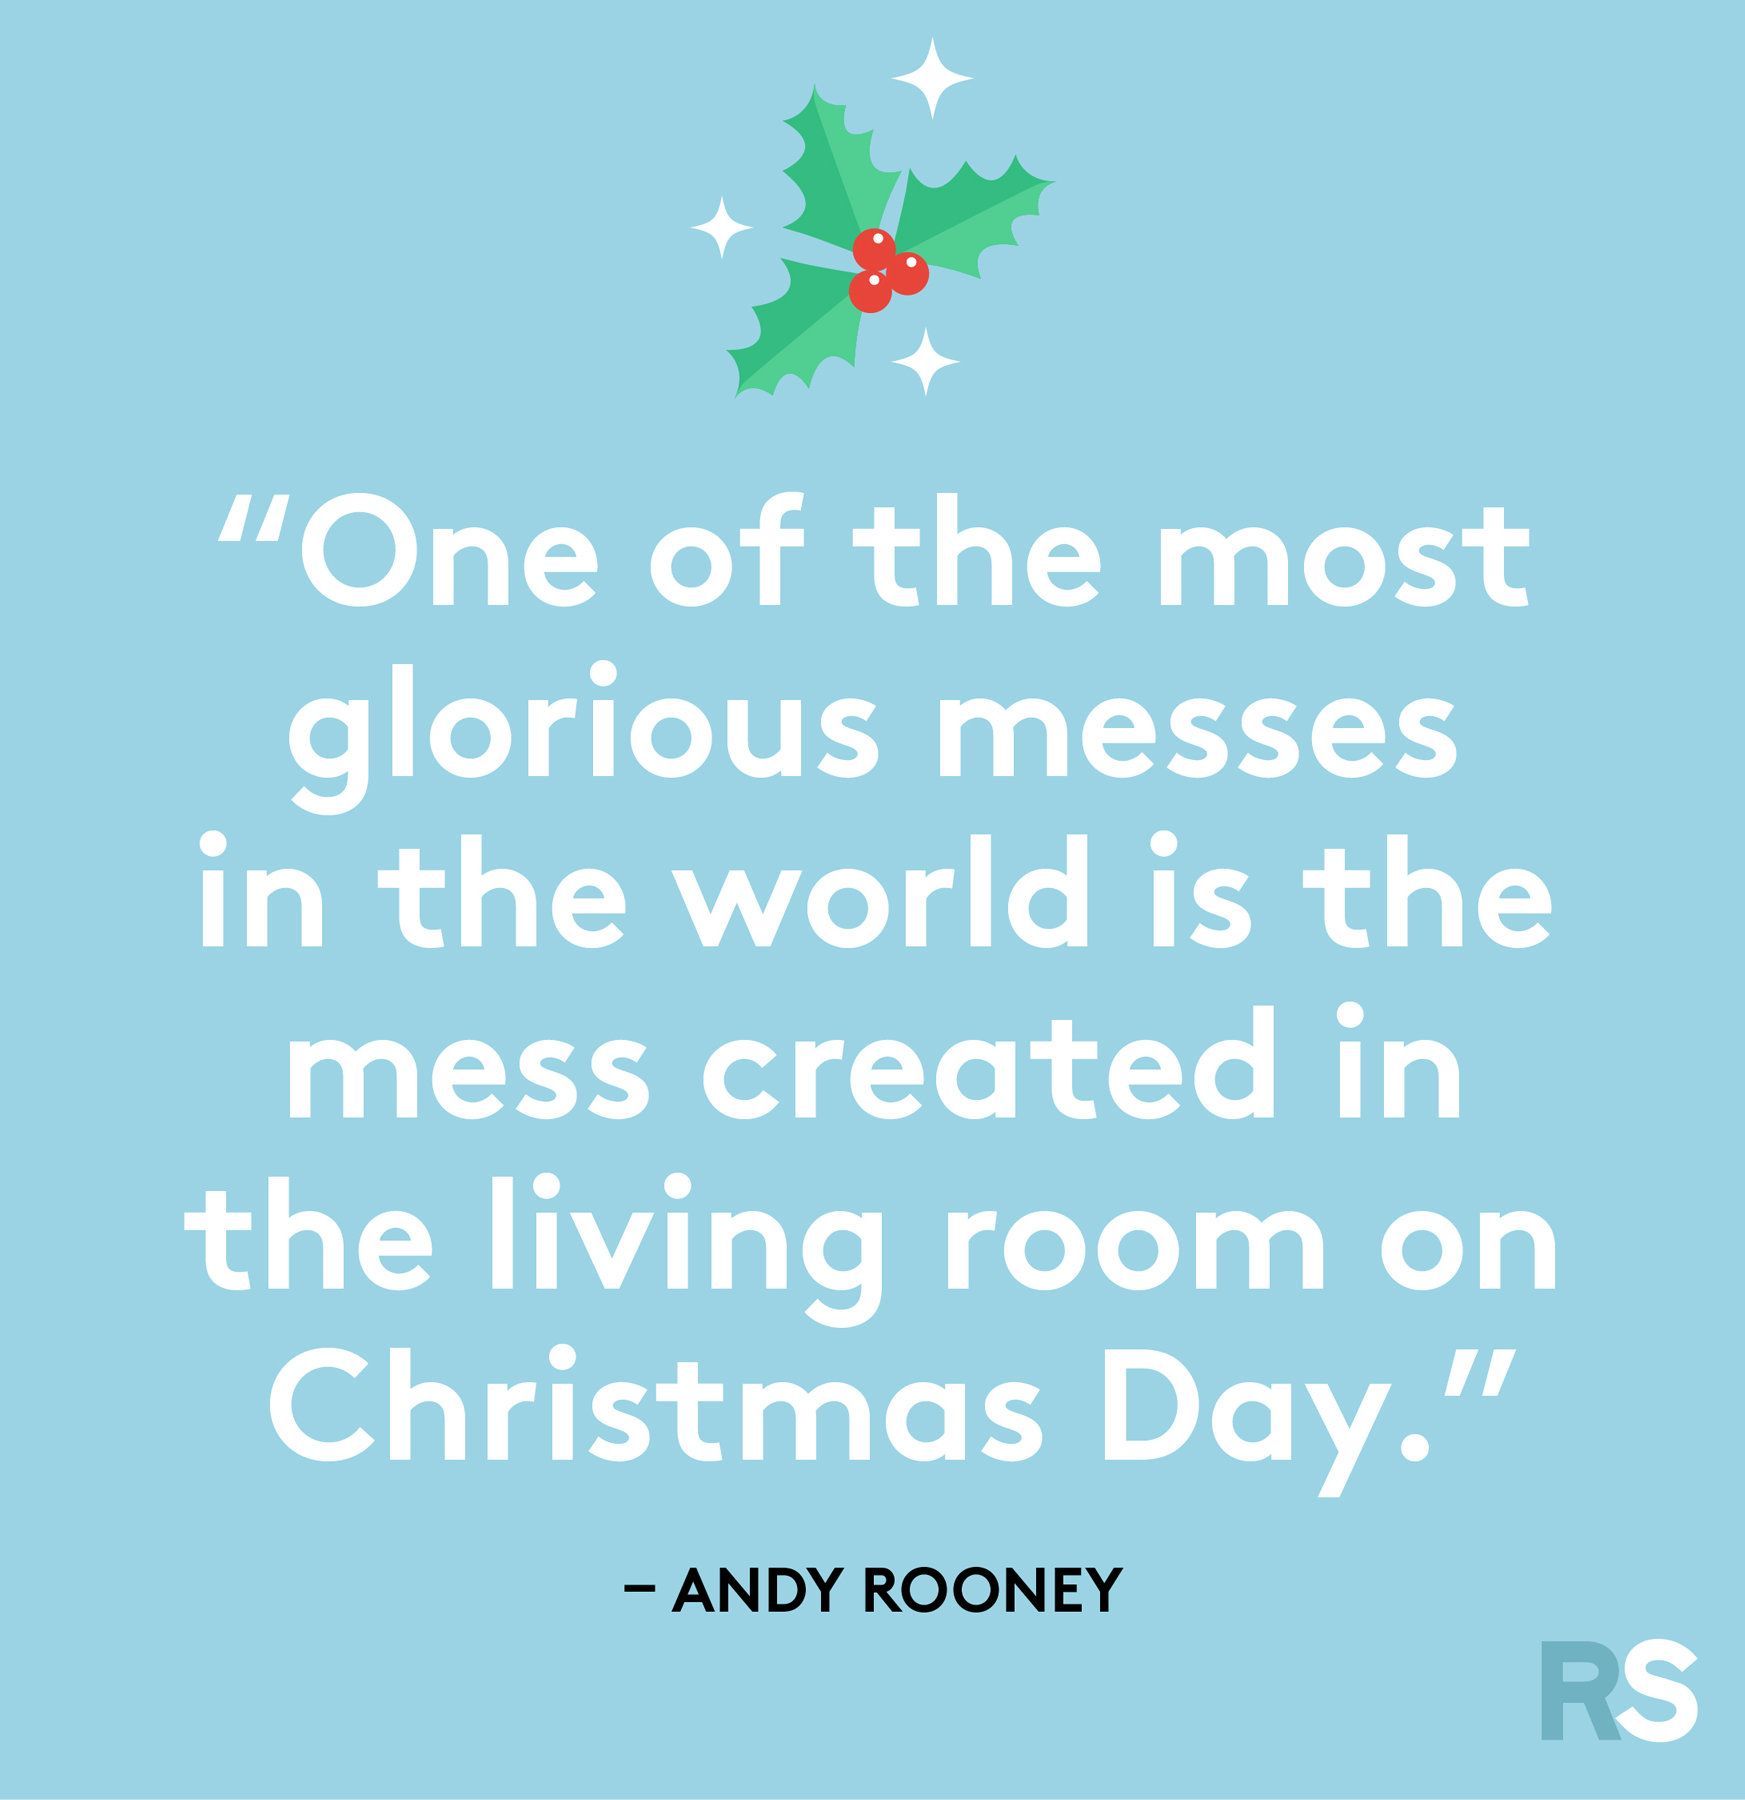 26 Christmas Quotes to Put You in the Holiday Spirit -   17 holiday Party quotes ideas